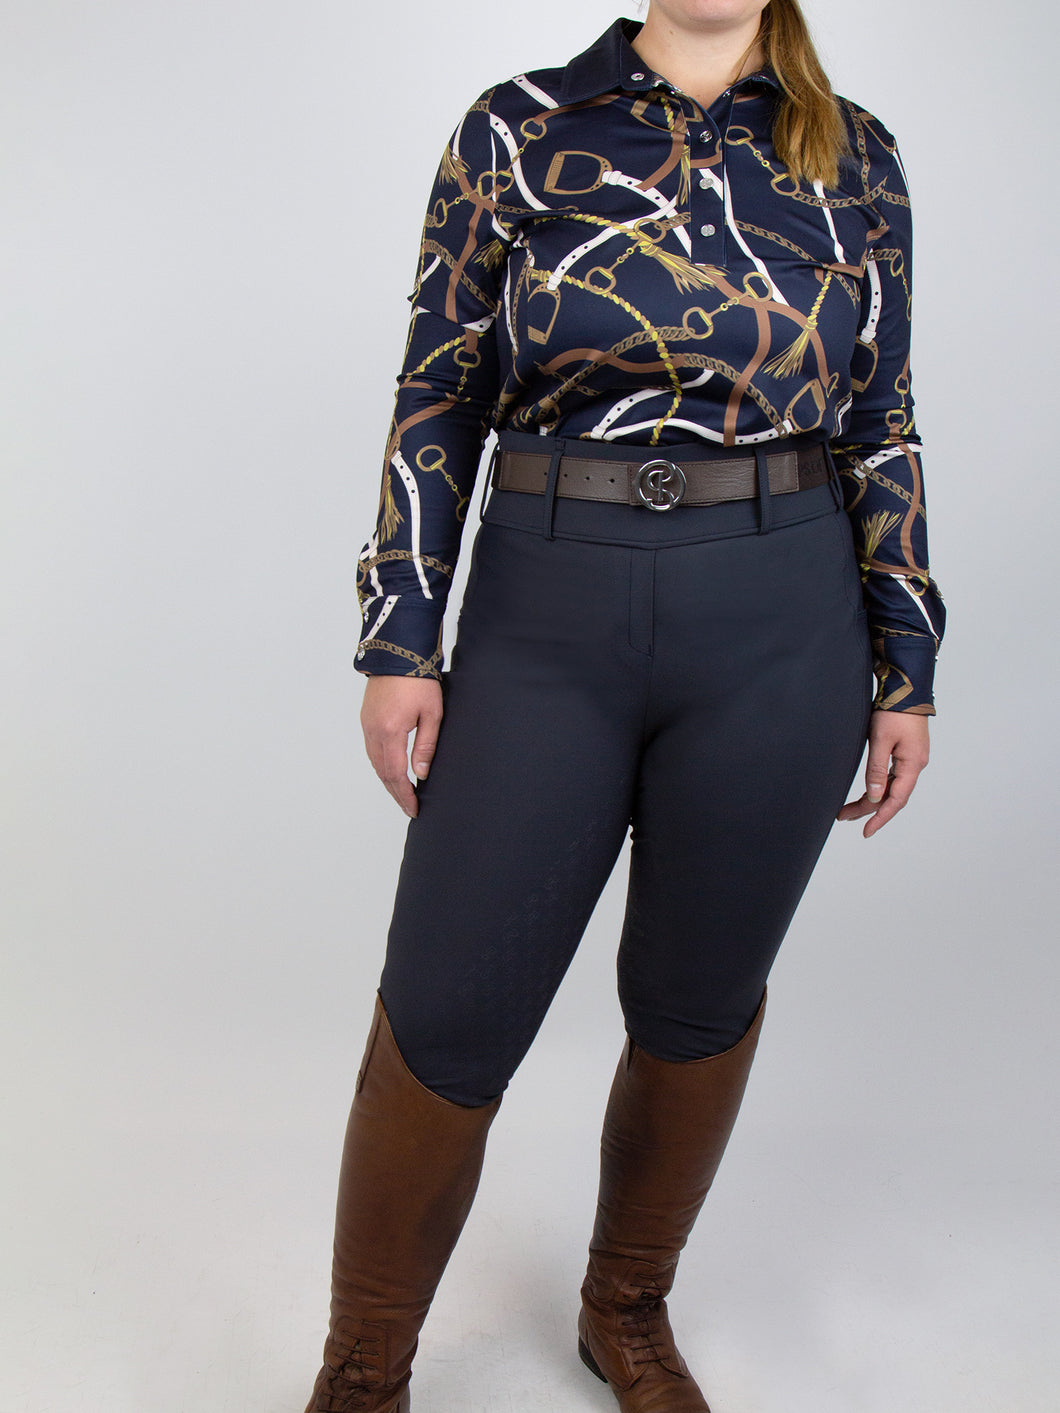 Plus Size, Wendy Tights / Navy